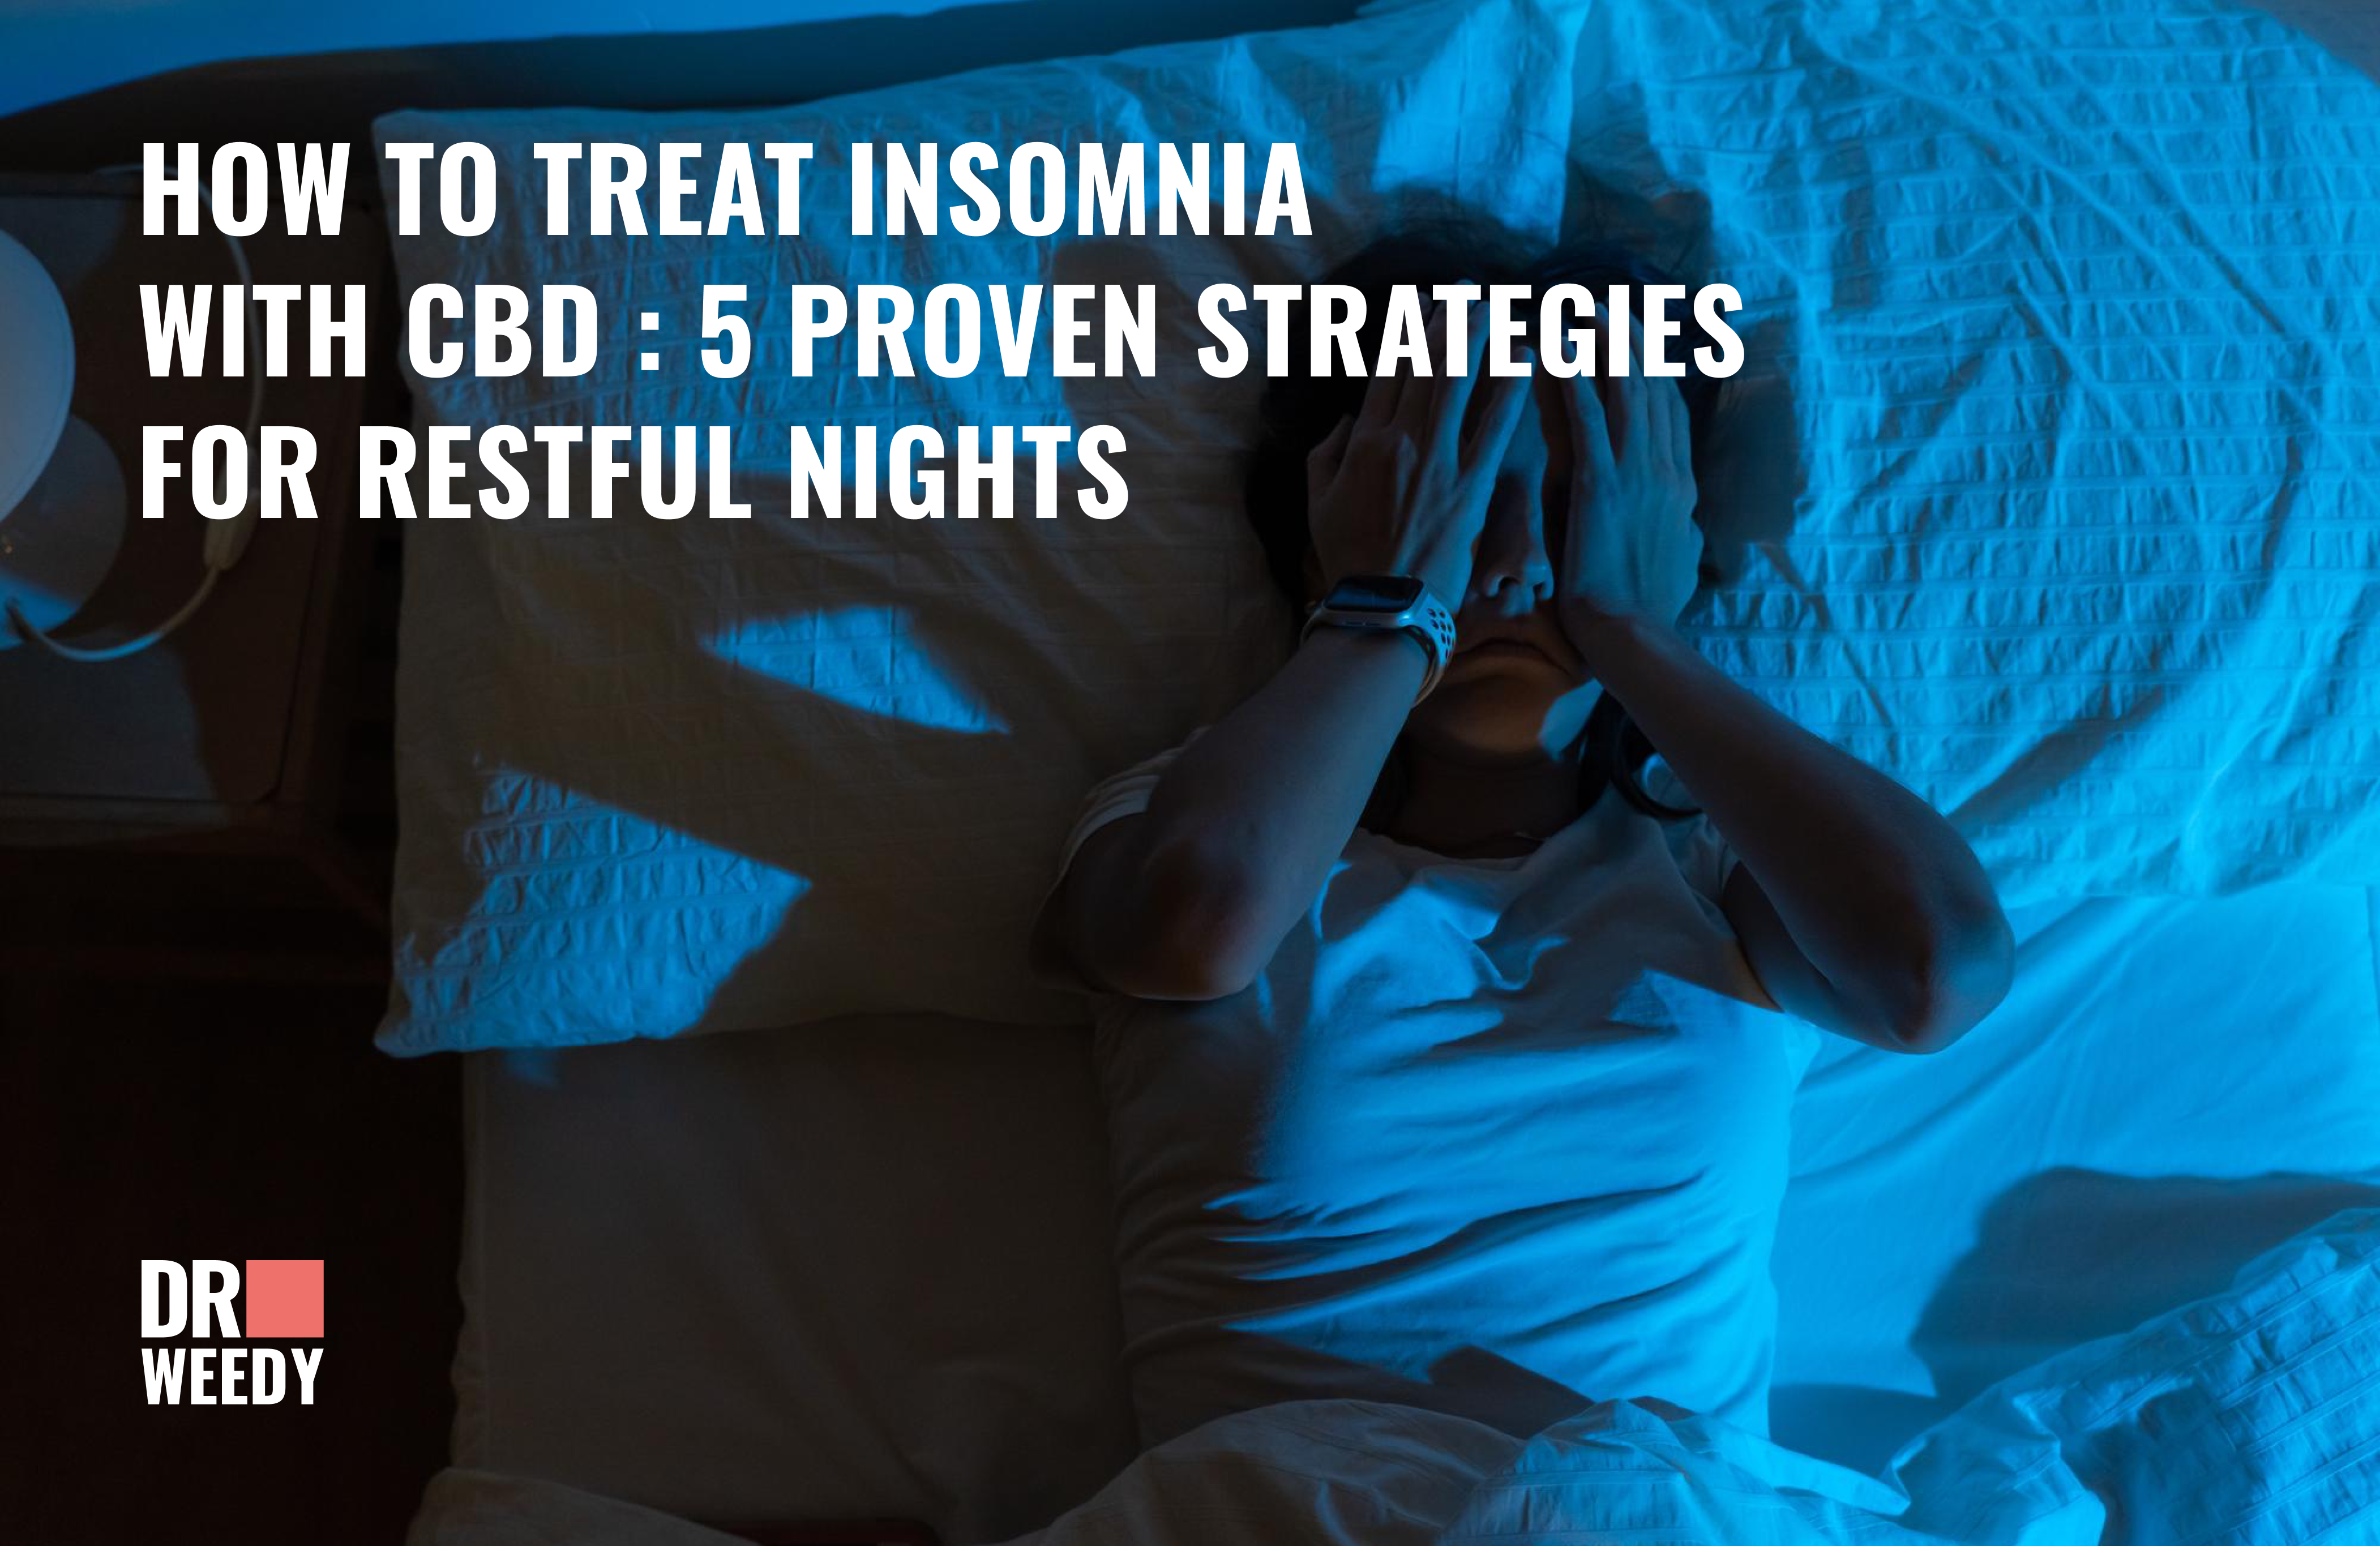 How to Treat Insomnia with CBD: 5 Proven Strategies for Restful Nights